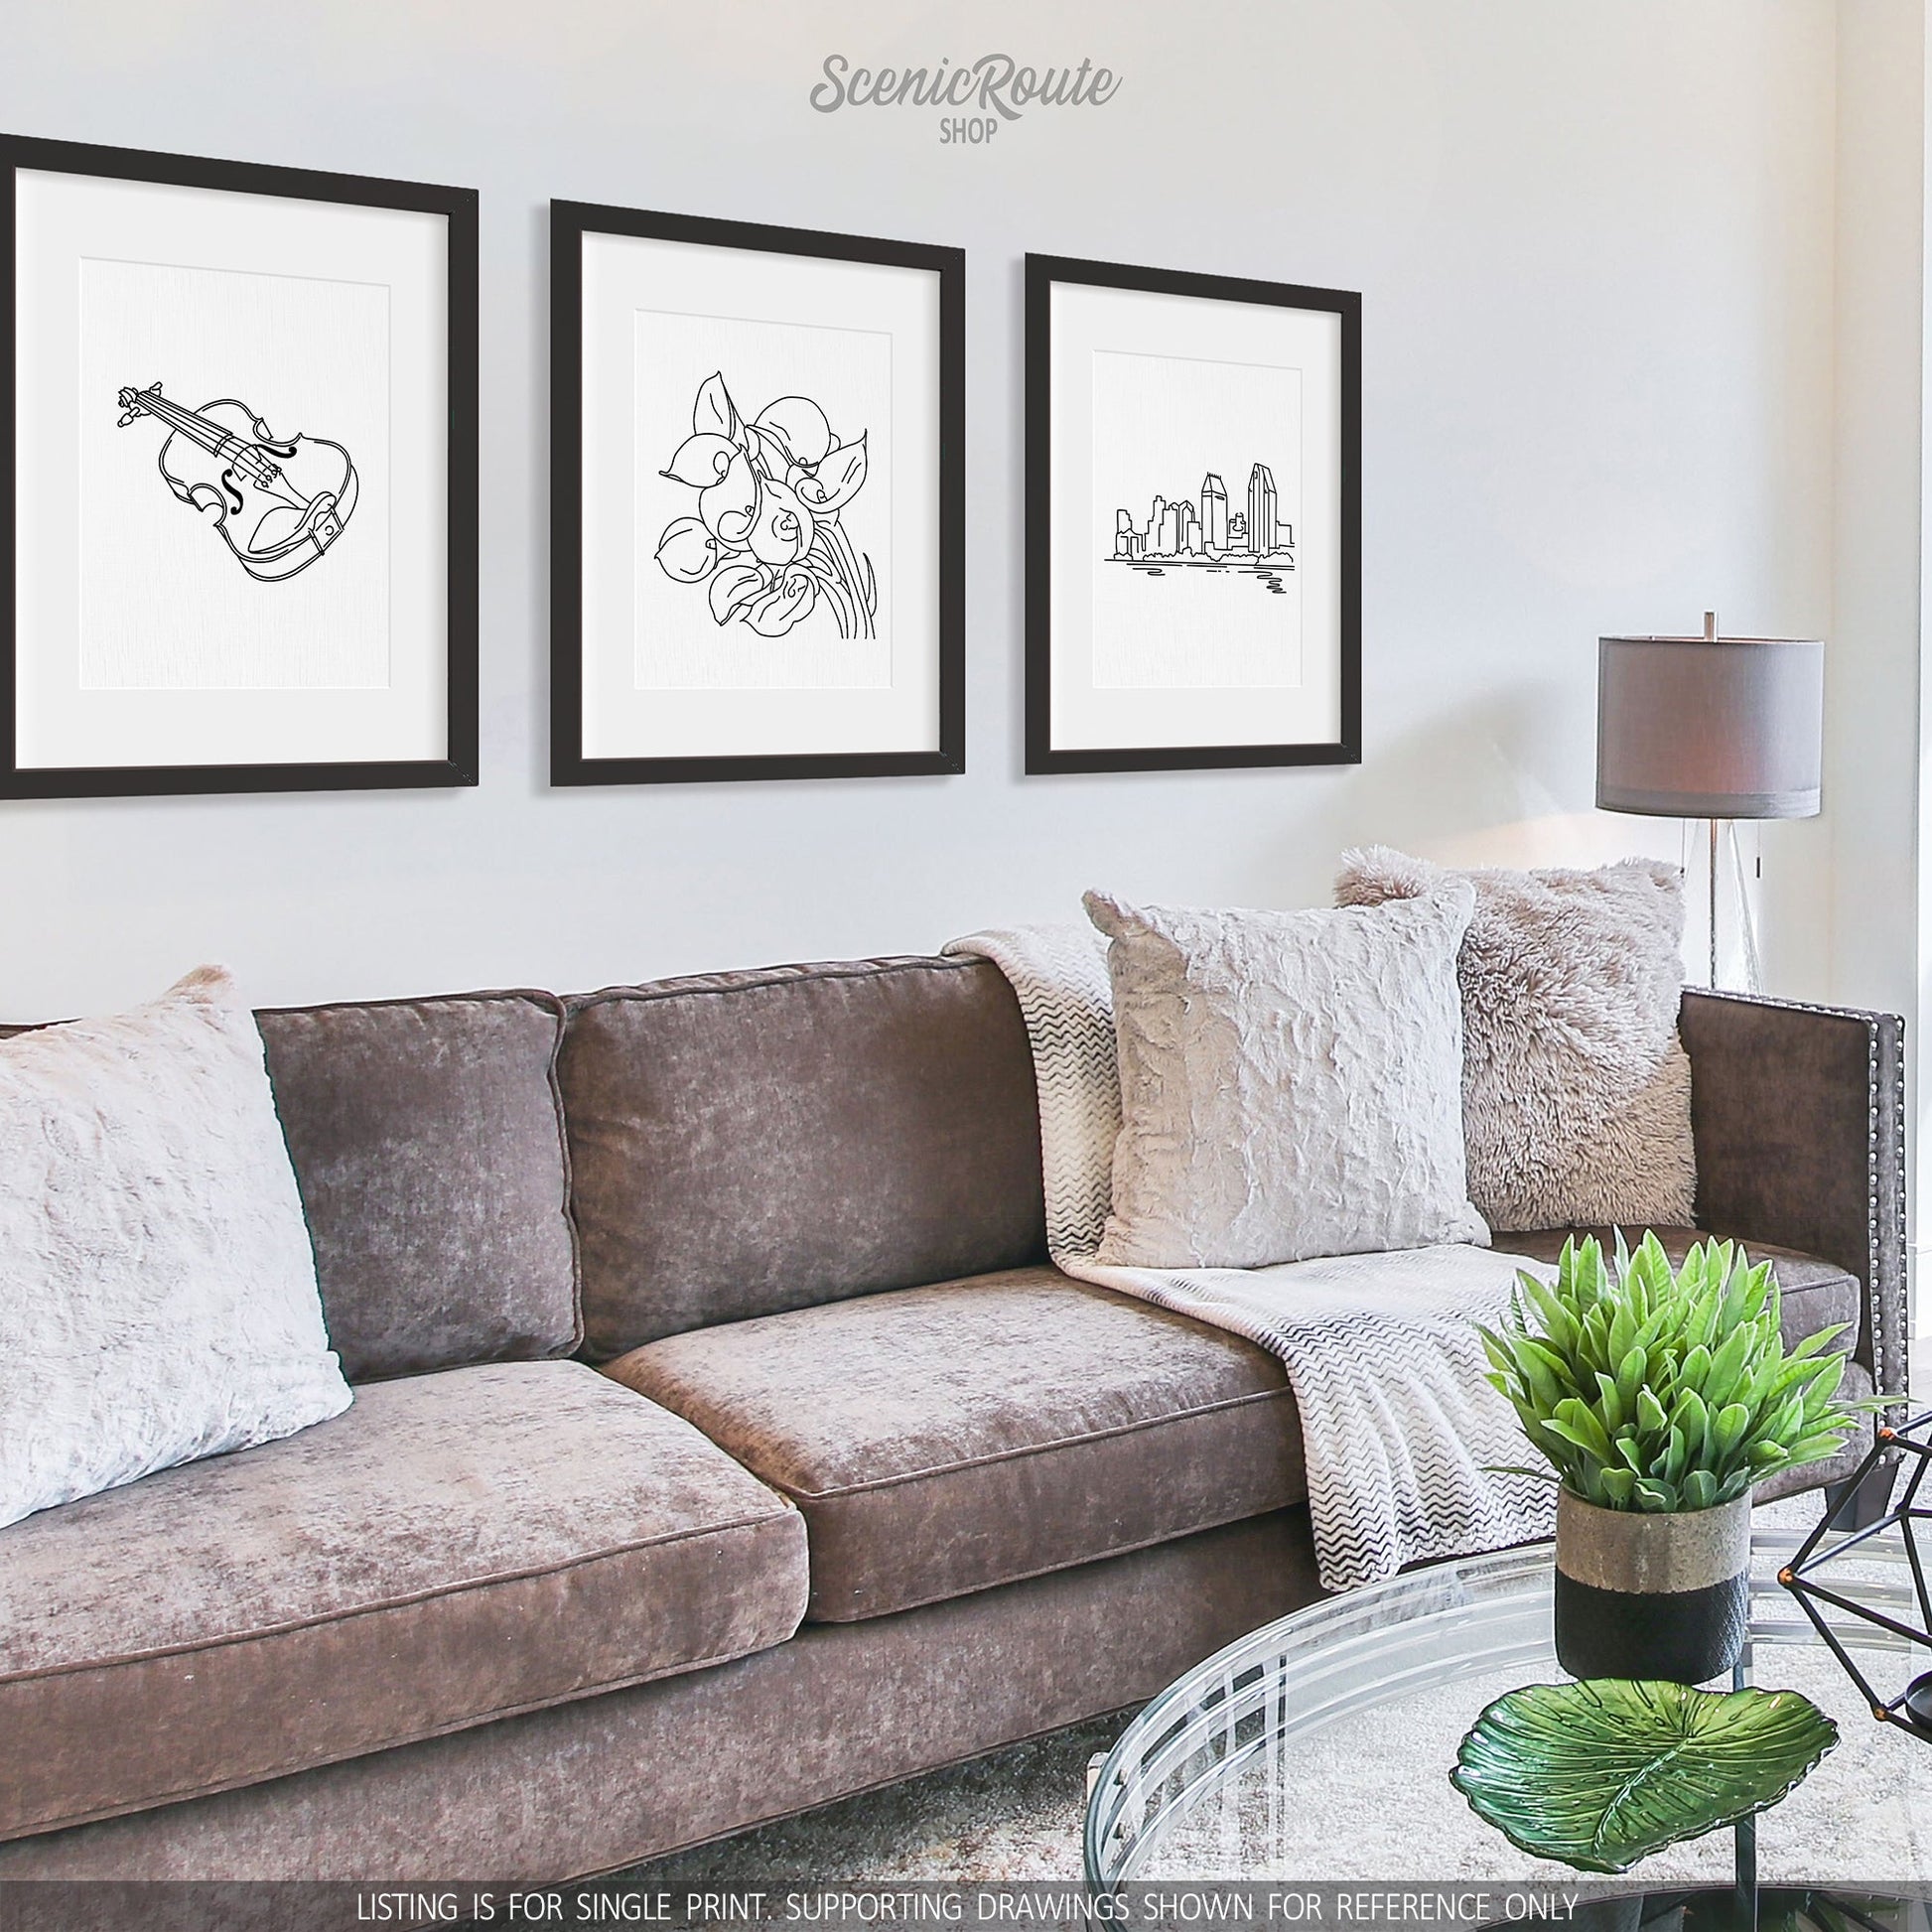 A group of three framed drawings on a white wall hanging above a couch with pillows and a blanket. The line art drawings include a Violin, Calla Lily Flower, and San Diego Skyline